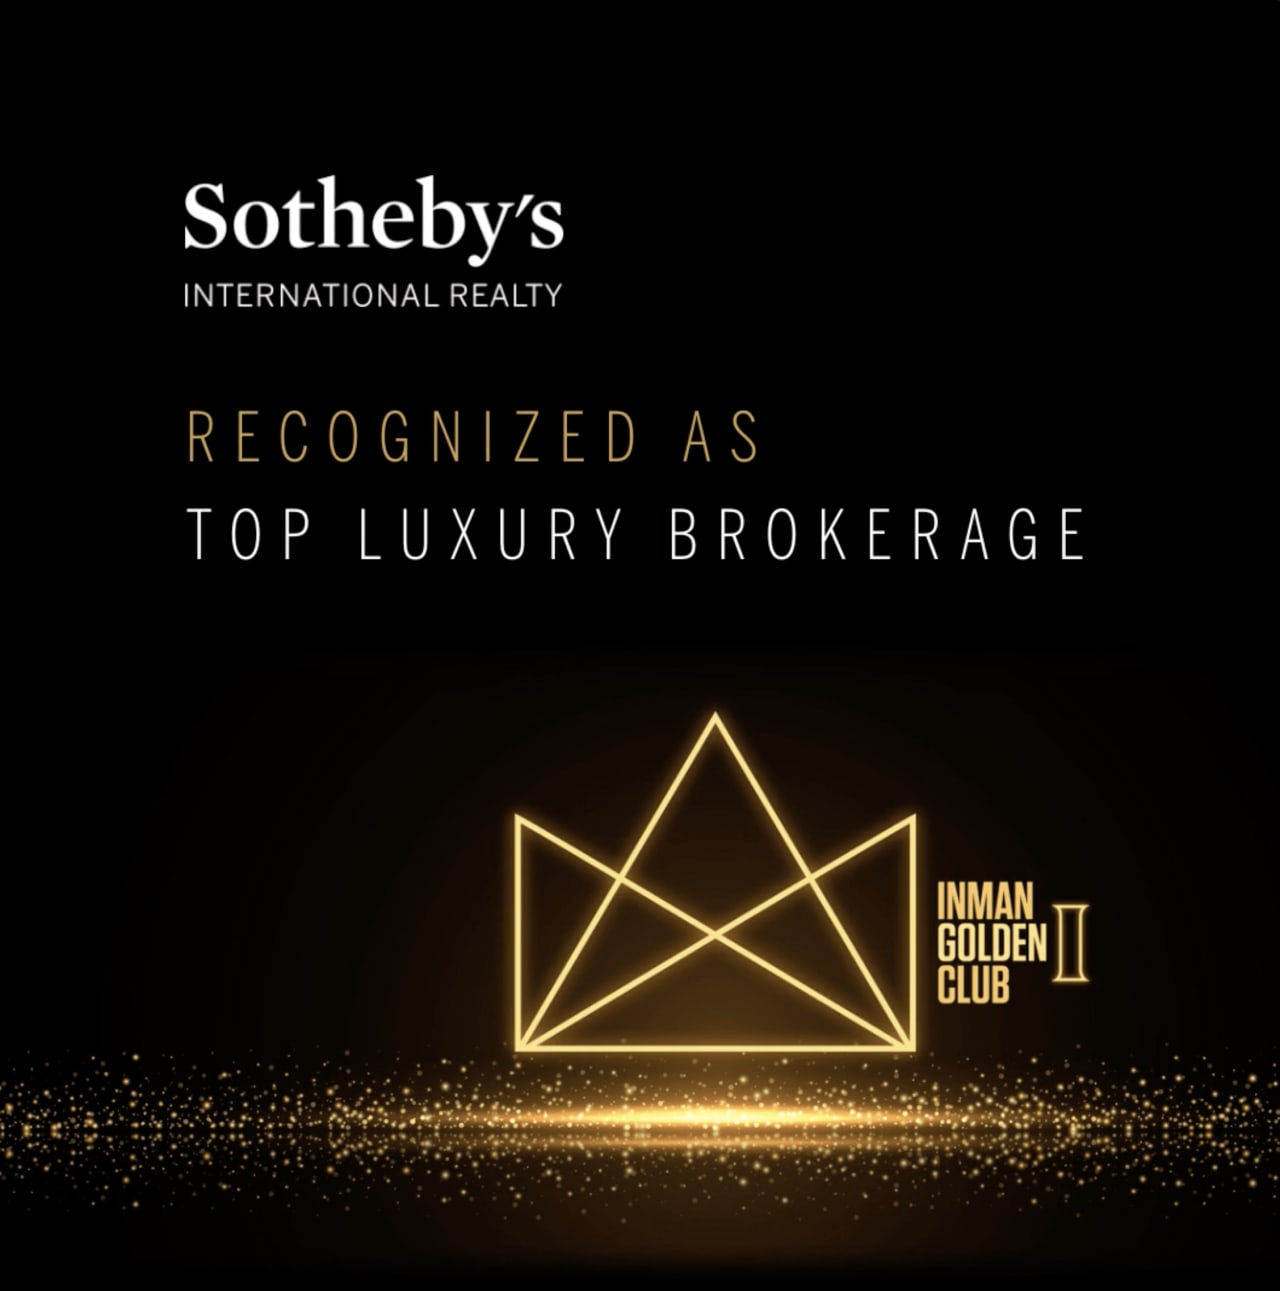 Sotheby's International Realty Recognized by Inman as Top Luxury Brokerage